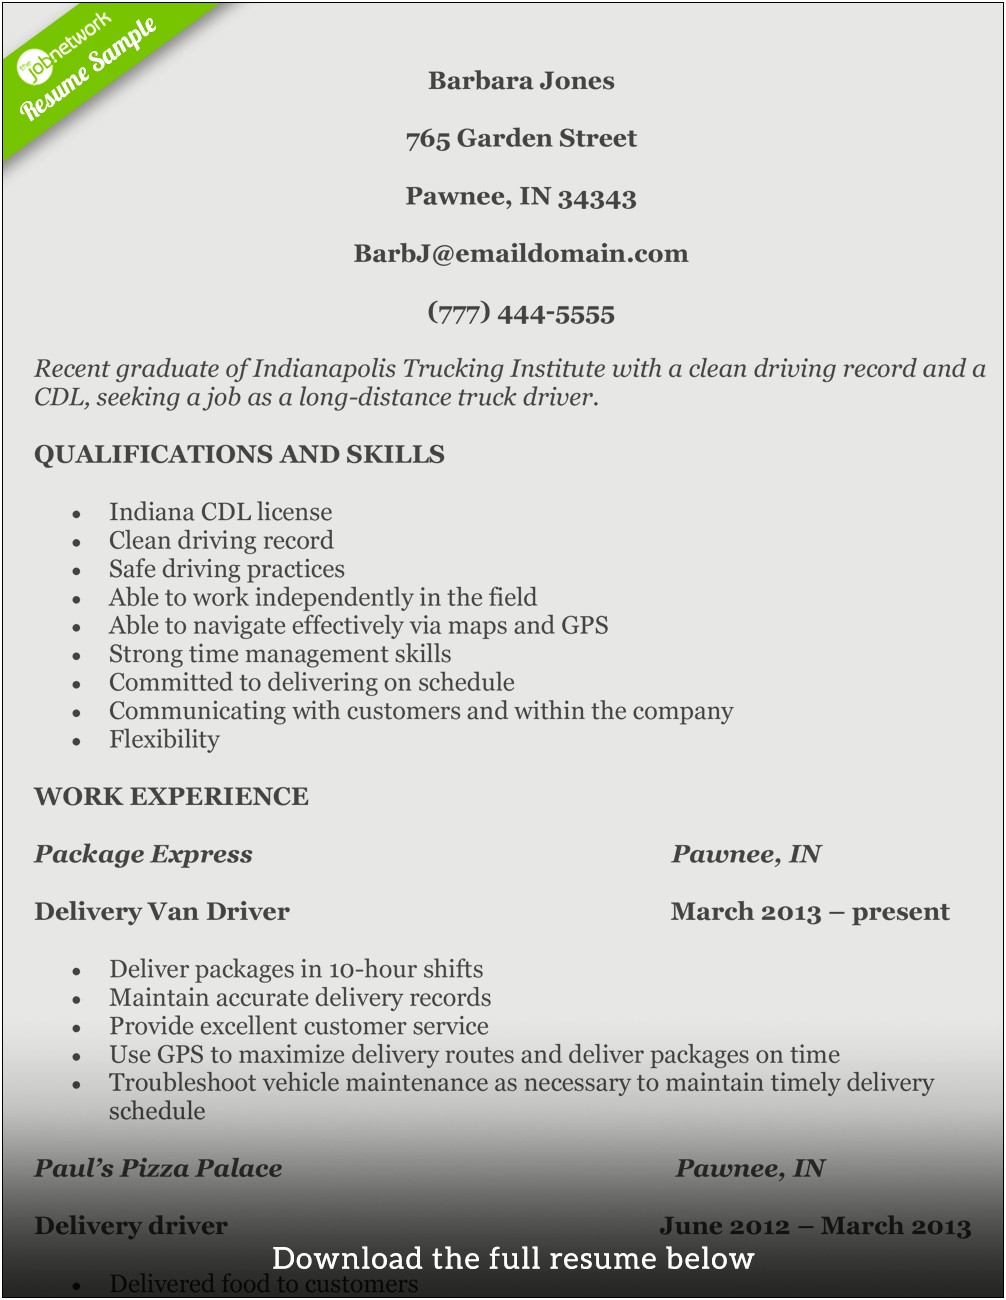 Courier Sample Resume No Experience